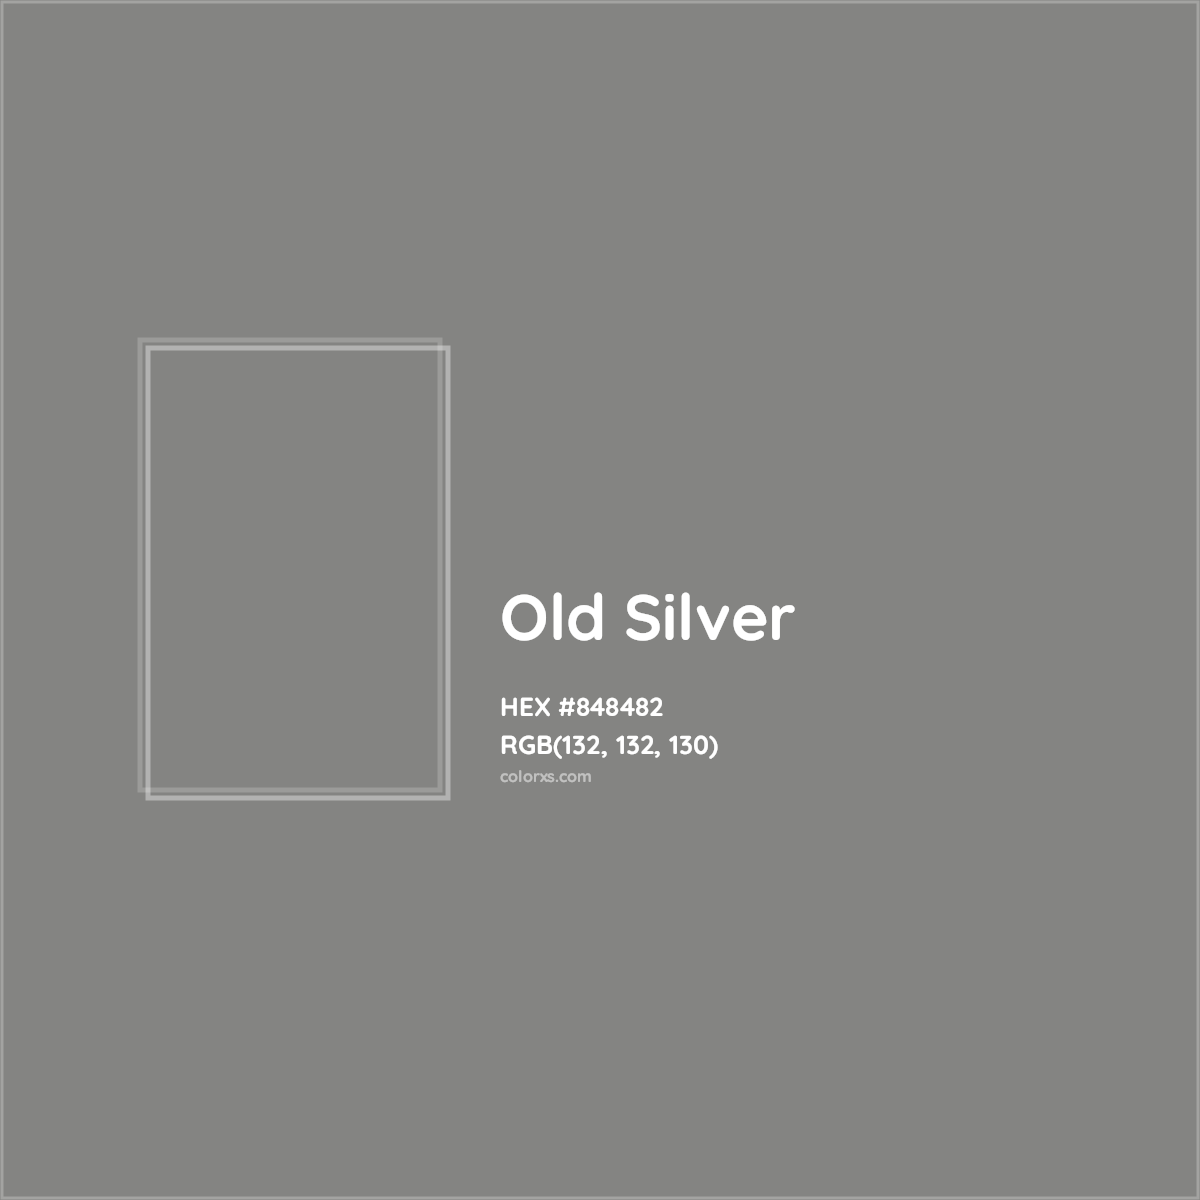 HEX #848482 Old Silver Color - Color Code